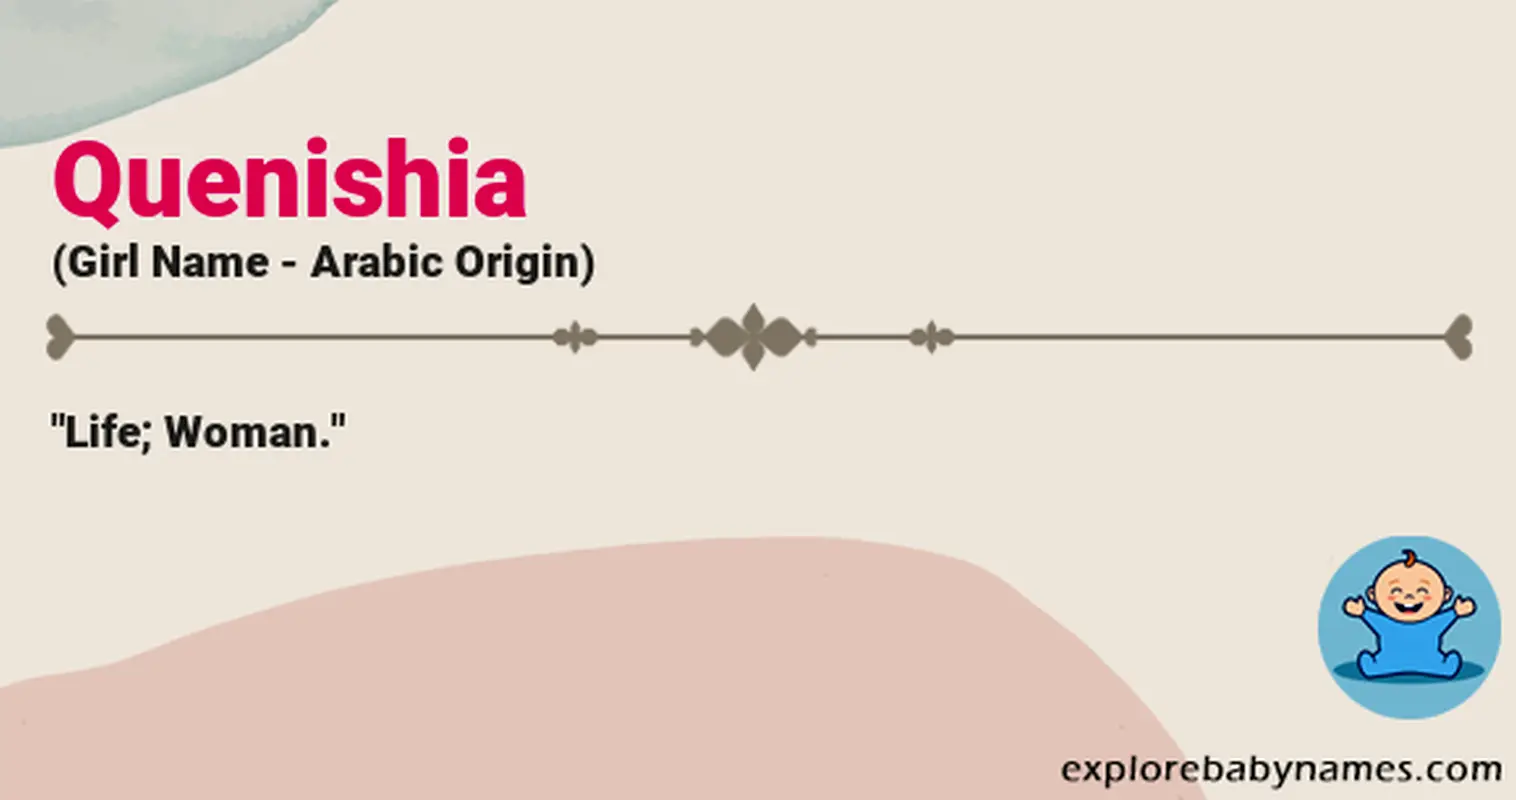 Meaning of Quenishia